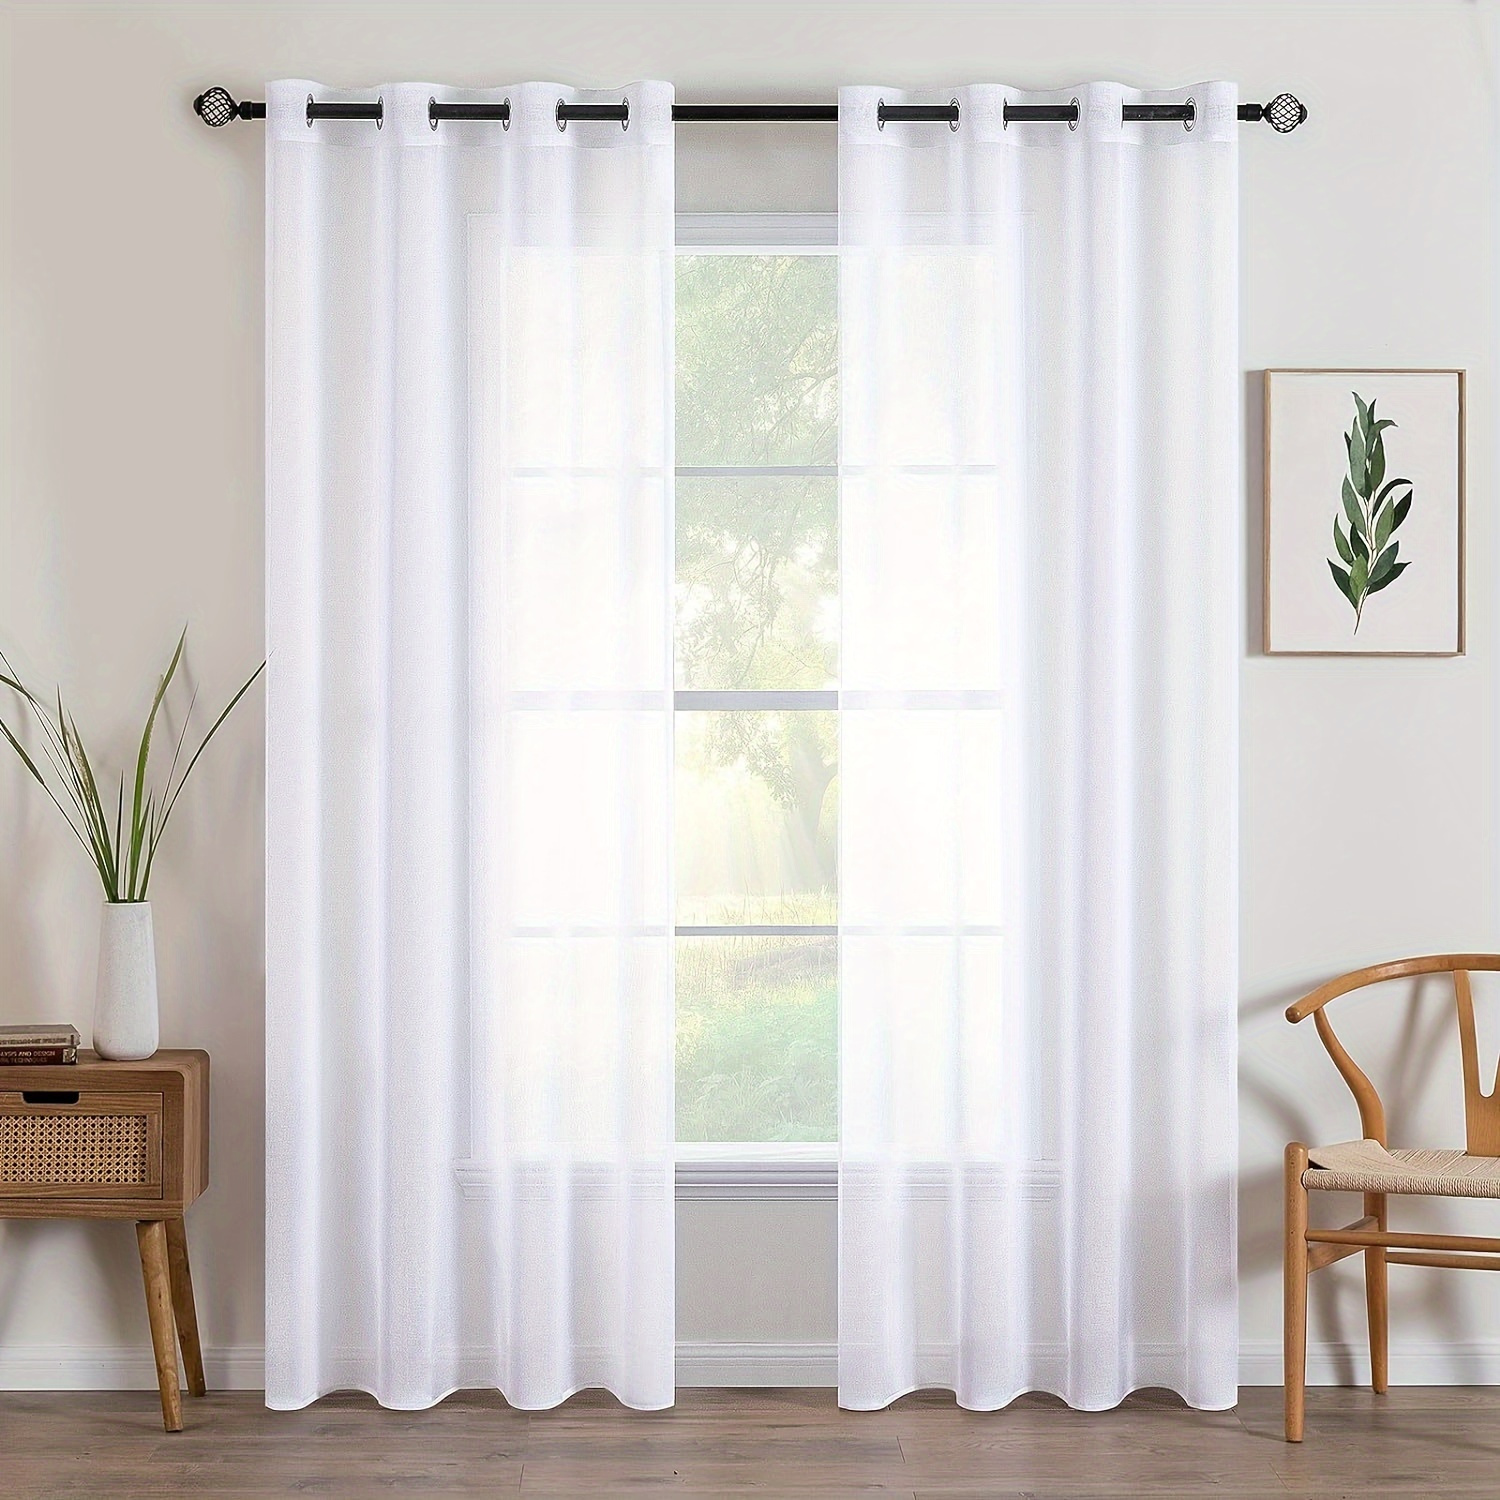 

2 Panels White Semi-sheer Curtains With Grommet Top Soft Voile Tulle Window Drapes For Living Room, Bedroom, And Kitchen Office Home Decor